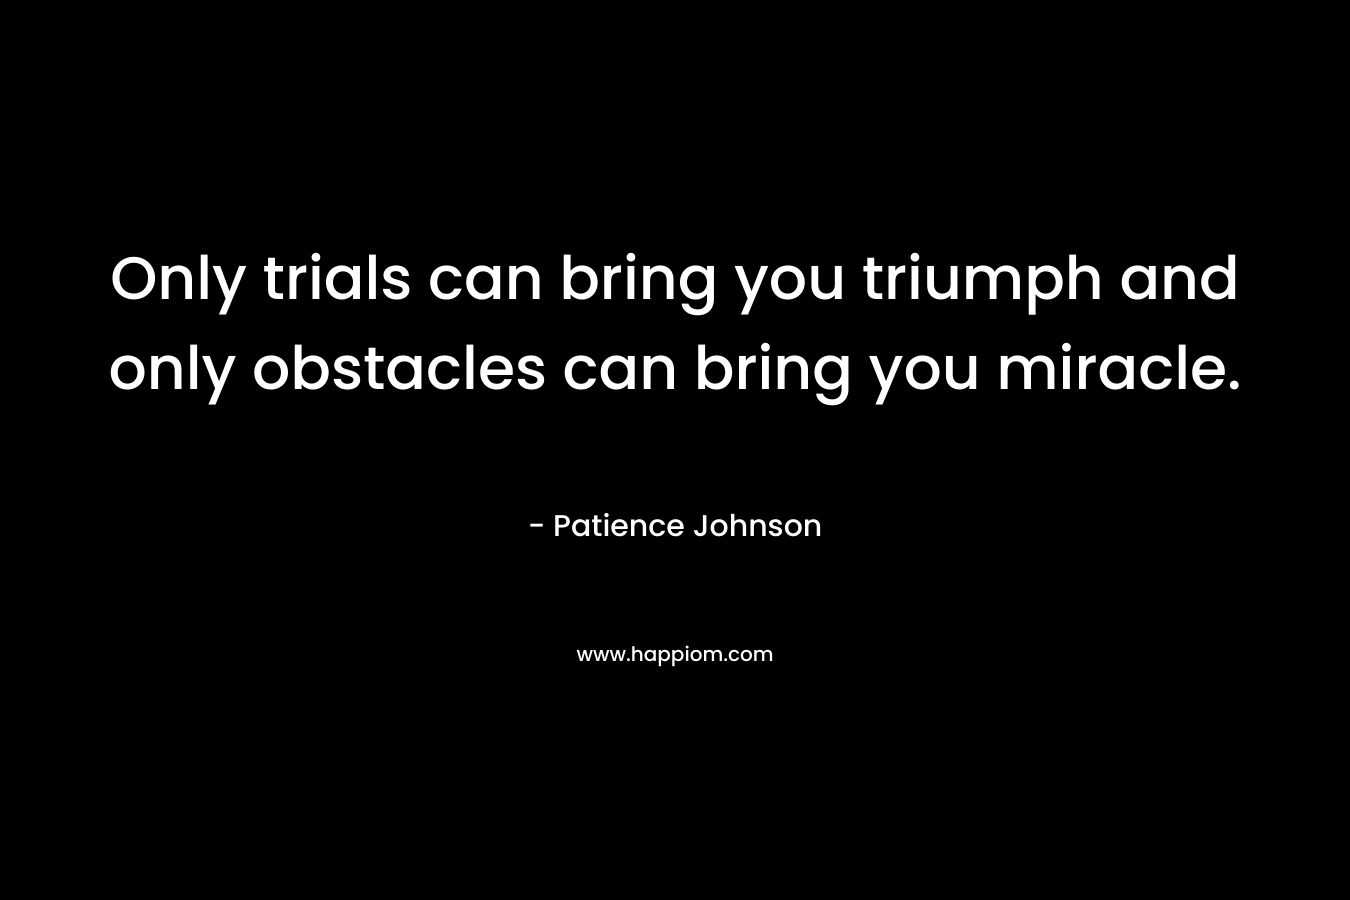 Only trials can bring you triumph and only obstacles can bring you miracle. – Patience Johnson